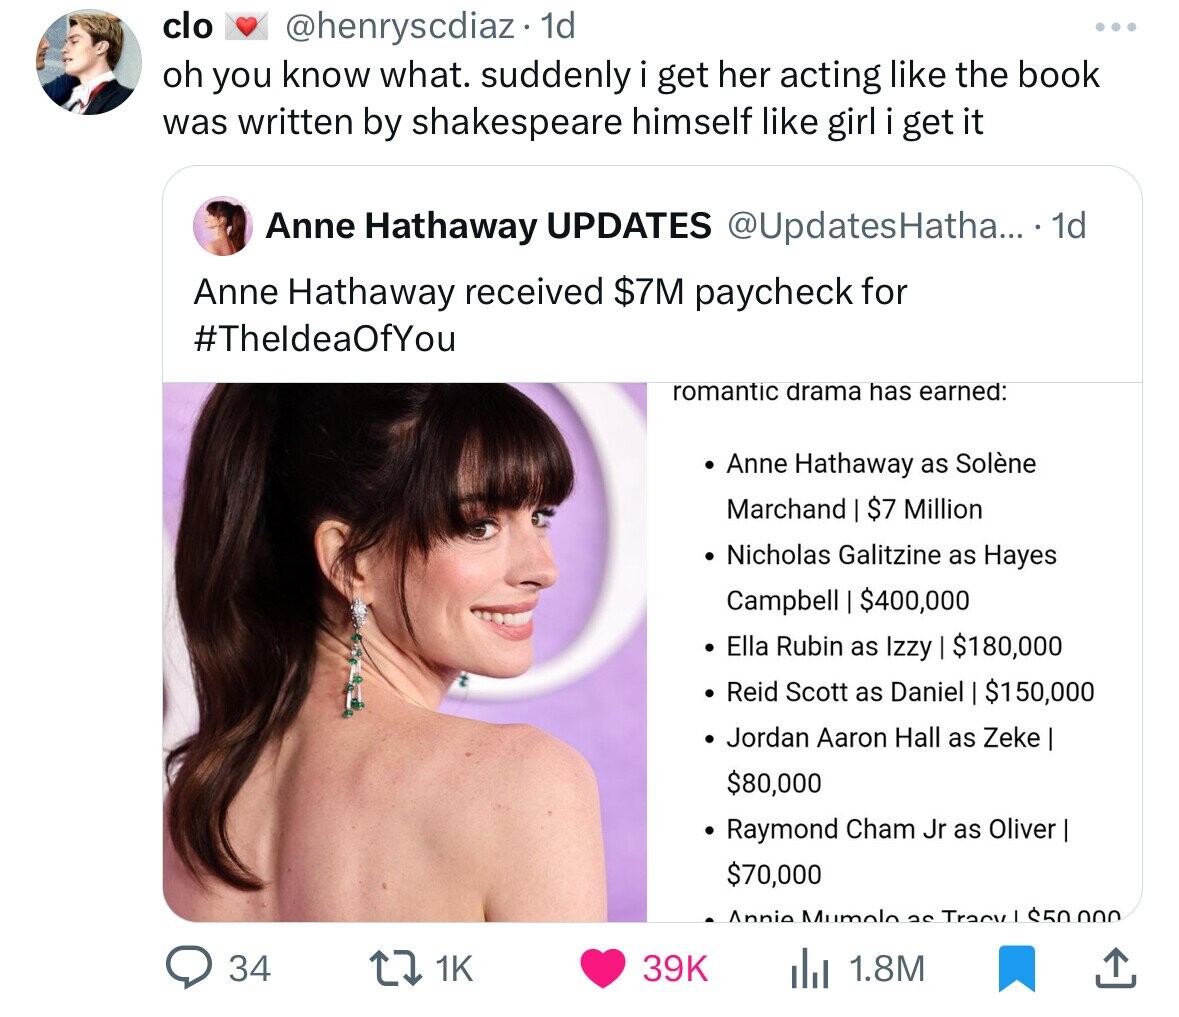 girl - clo . 1d oh you know what. suddenly i get her acting the book was written by shakespeare himself girl i get it Anne Hathaway Updates Hatha.... 1d Anne Hathaway received $7M paycheck for romantic drama has earned . Anne Hathaway as Solne Marchand |